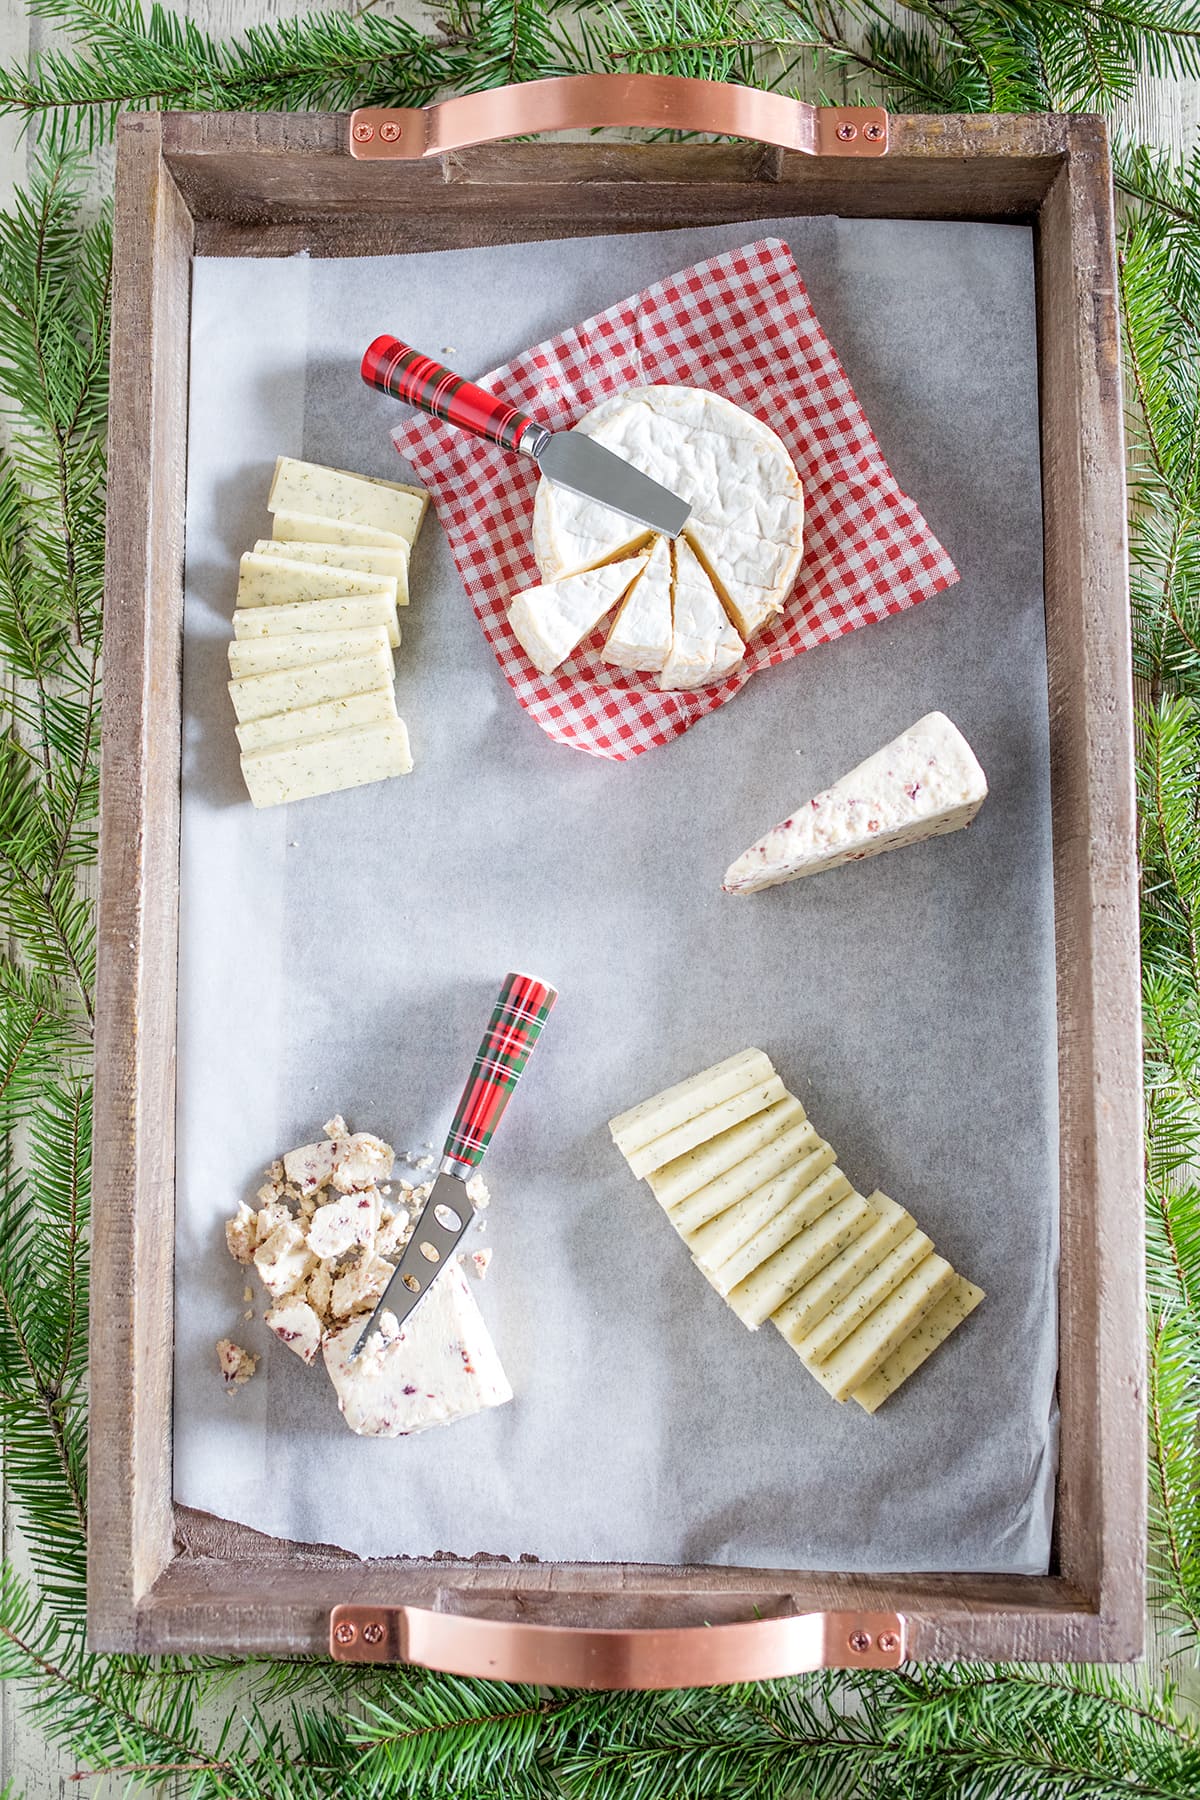 How to Make a Christmas Cheese Board